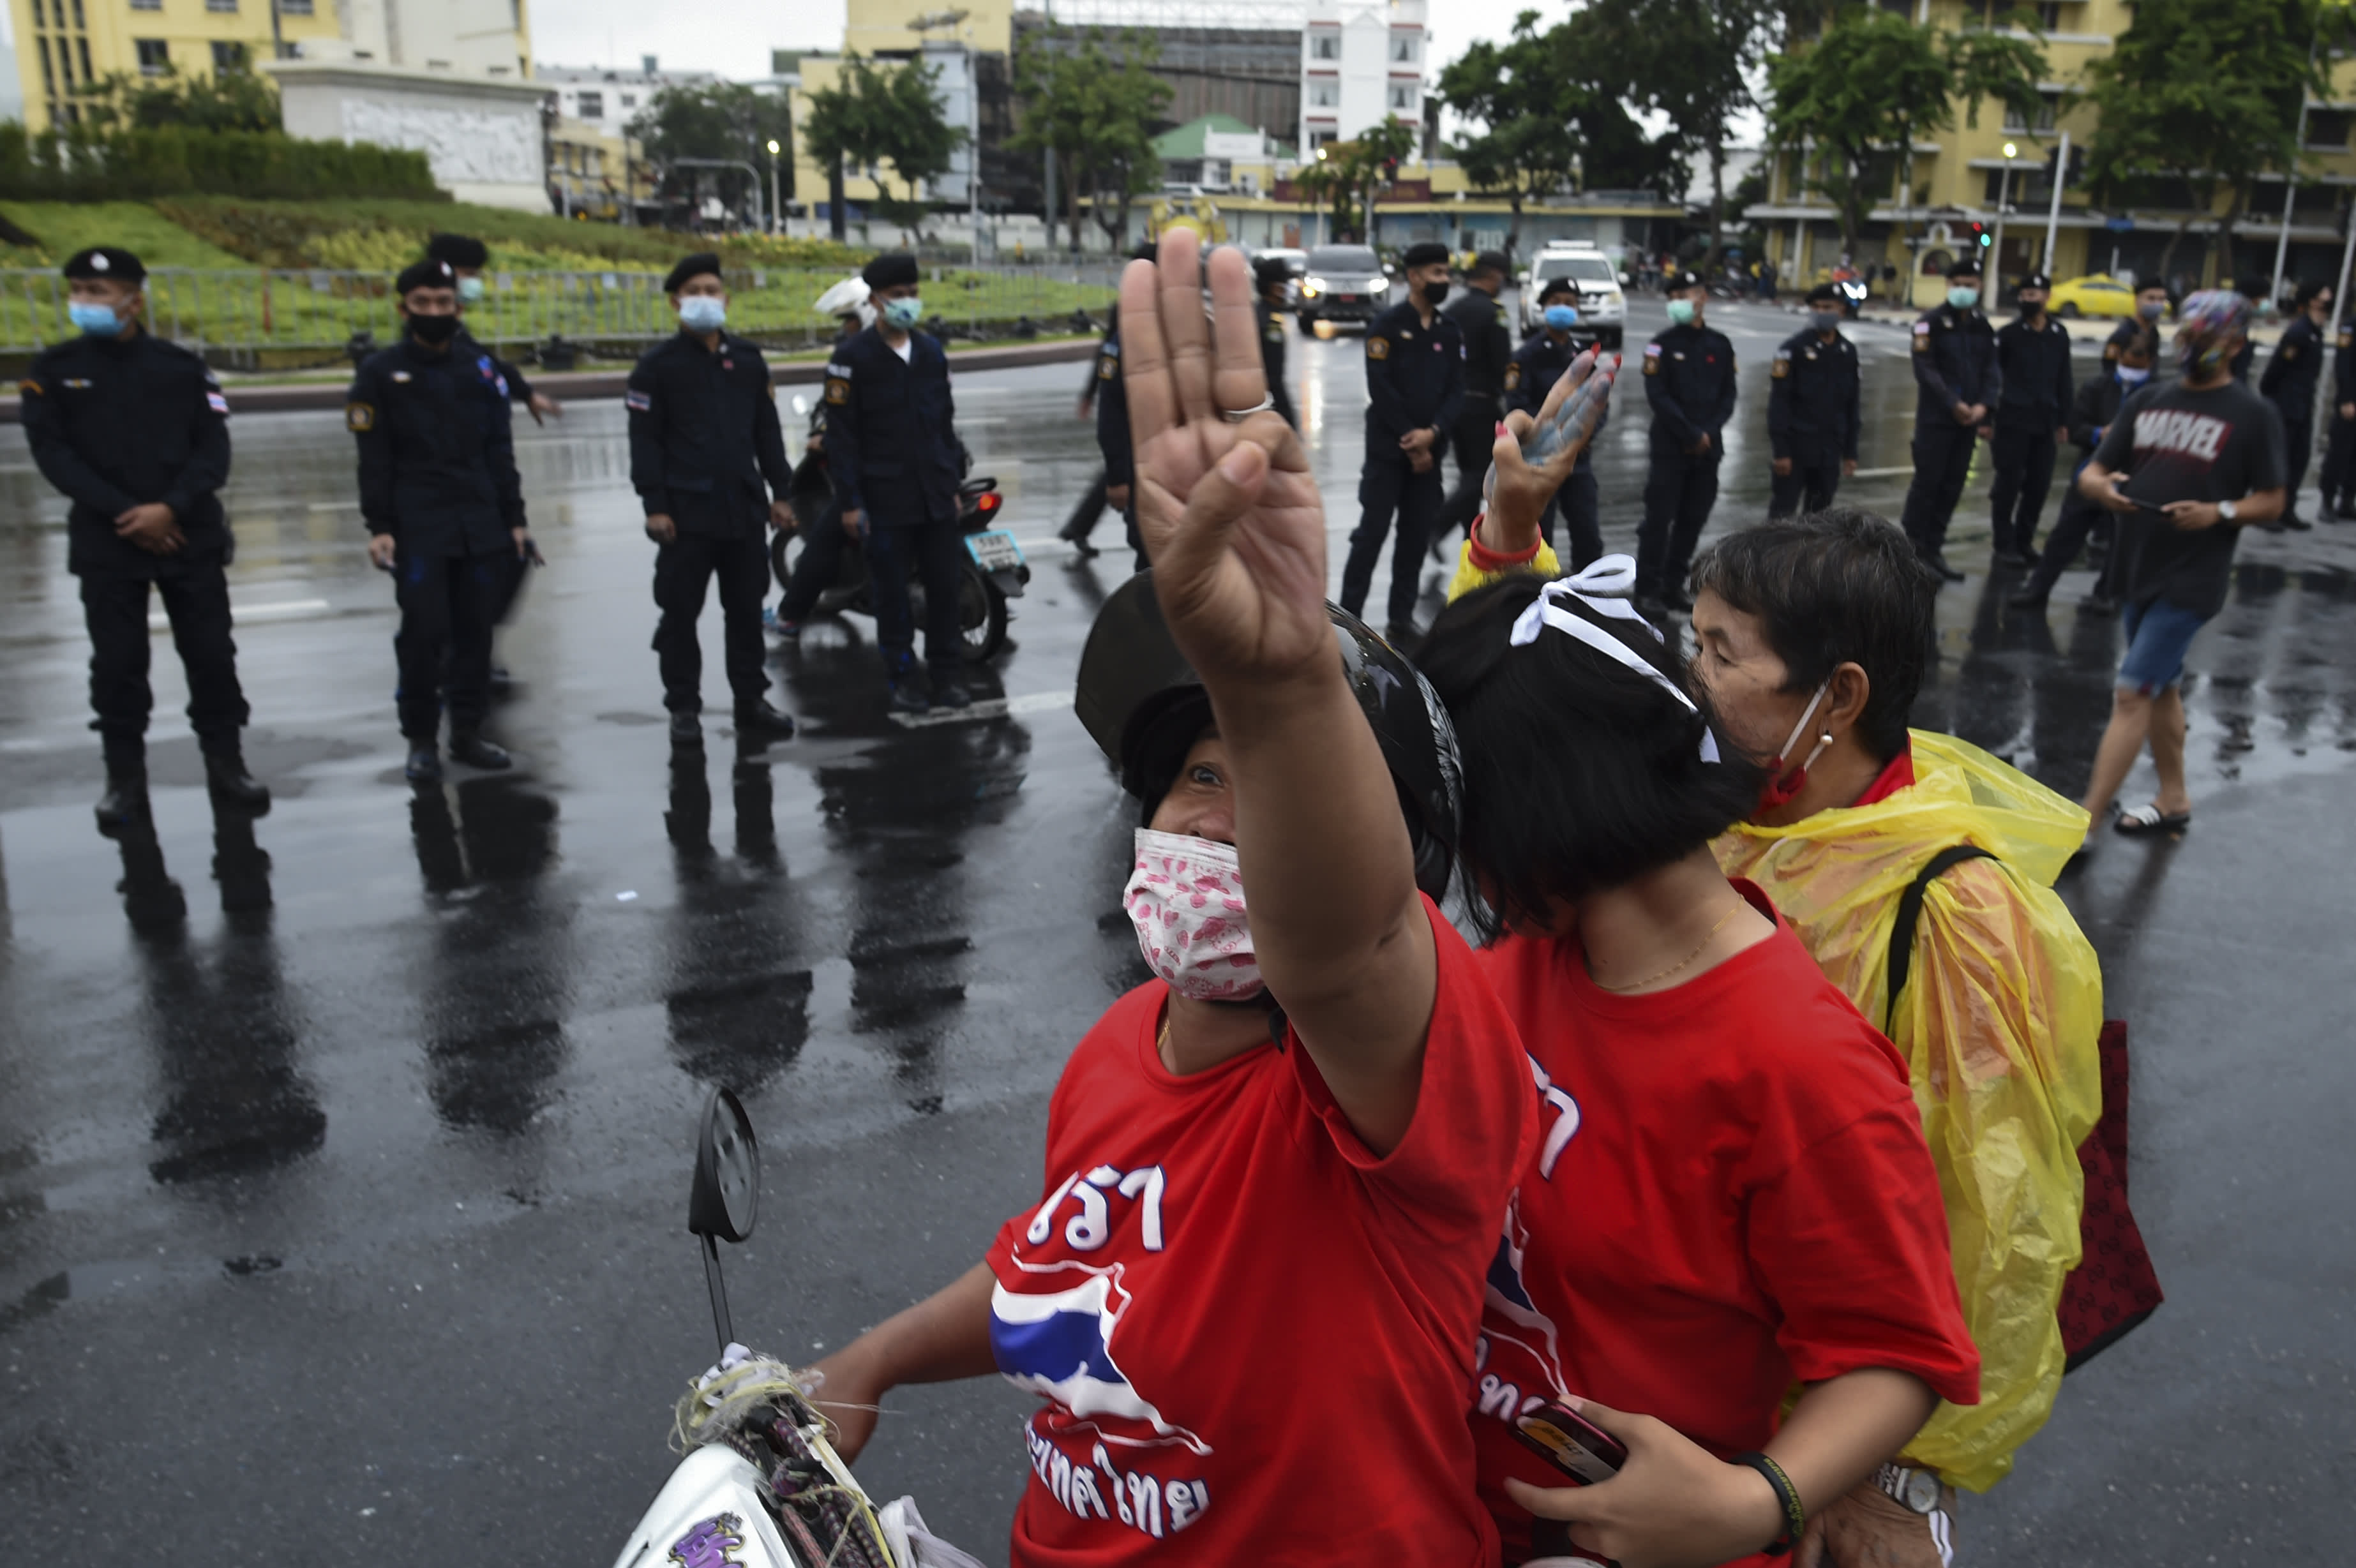 Protests in Thailand are a 'double whammy' for the economy, which is reeling from Covid-19 - CNBC